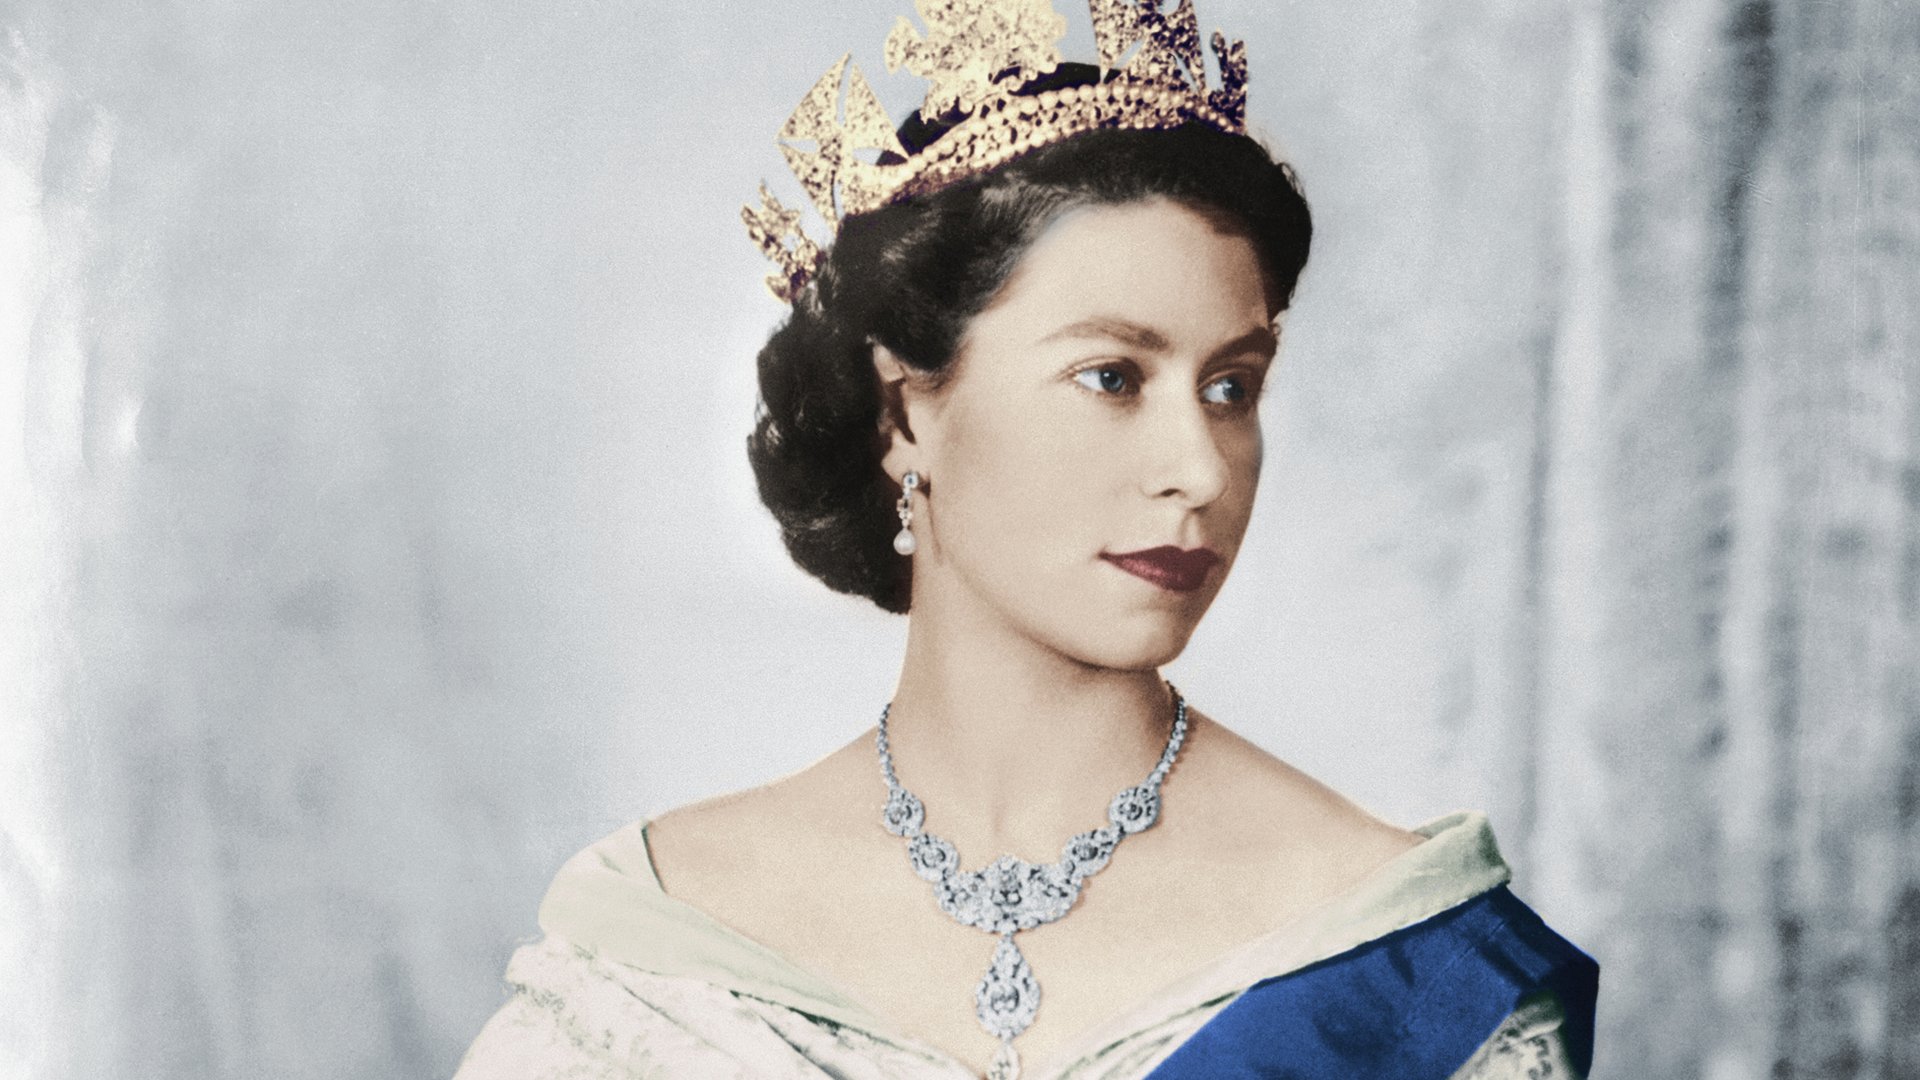 We pay our respects to Her Majesty Queen Elizabeth II